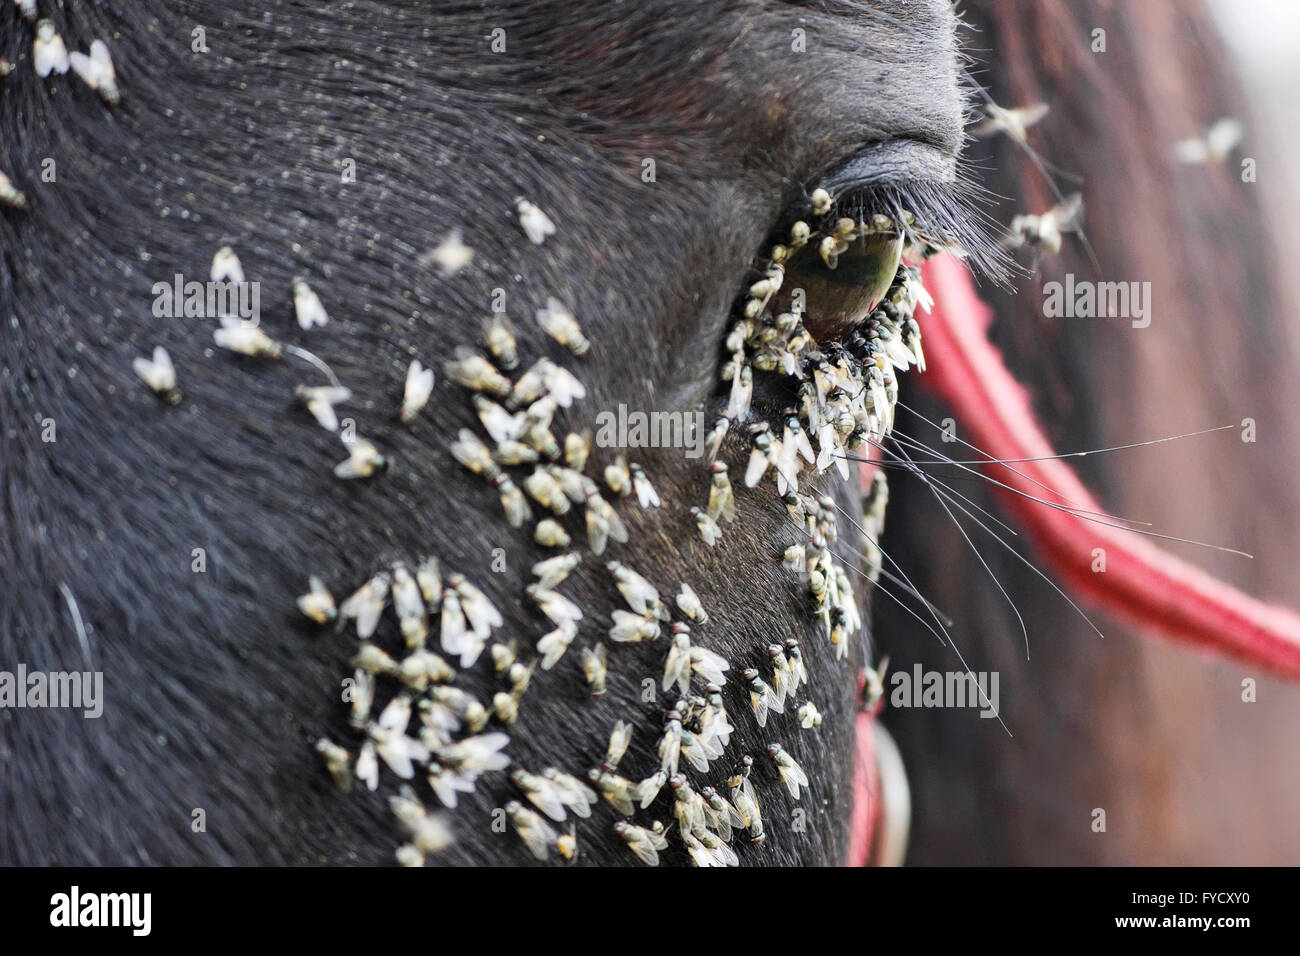 Swarm of flies feeding on the moisture secretions produced by the tear ducts of a horse's eyes. Stock Photo